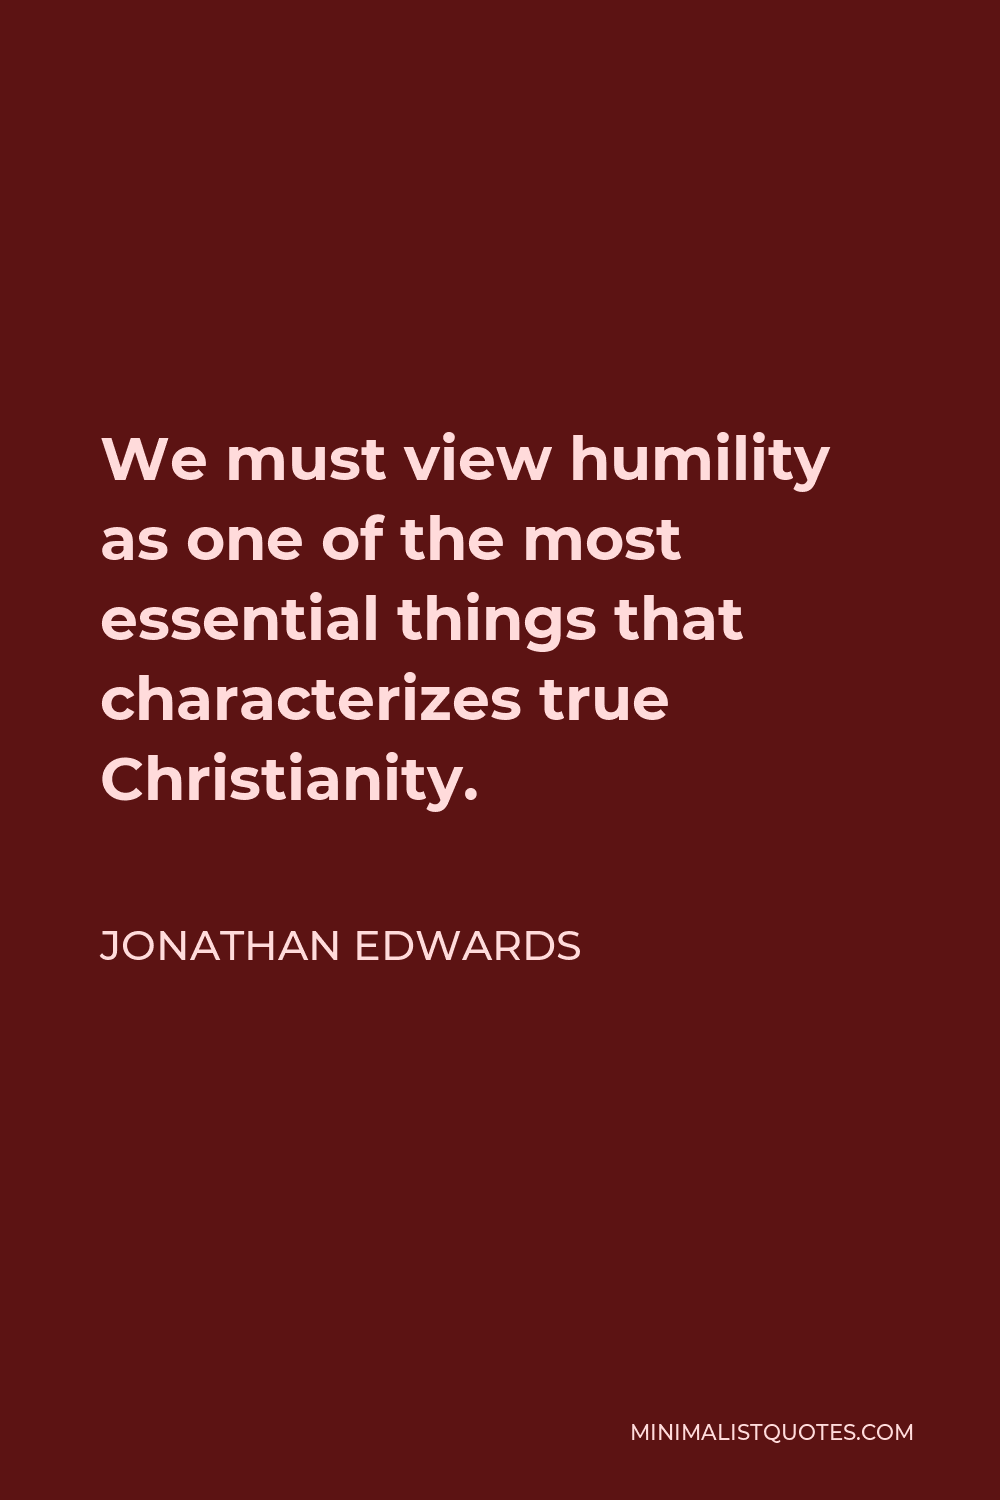 Jonathan Edwards Quote - We must view humility as one of the most essential things that characterizes true Christianity.